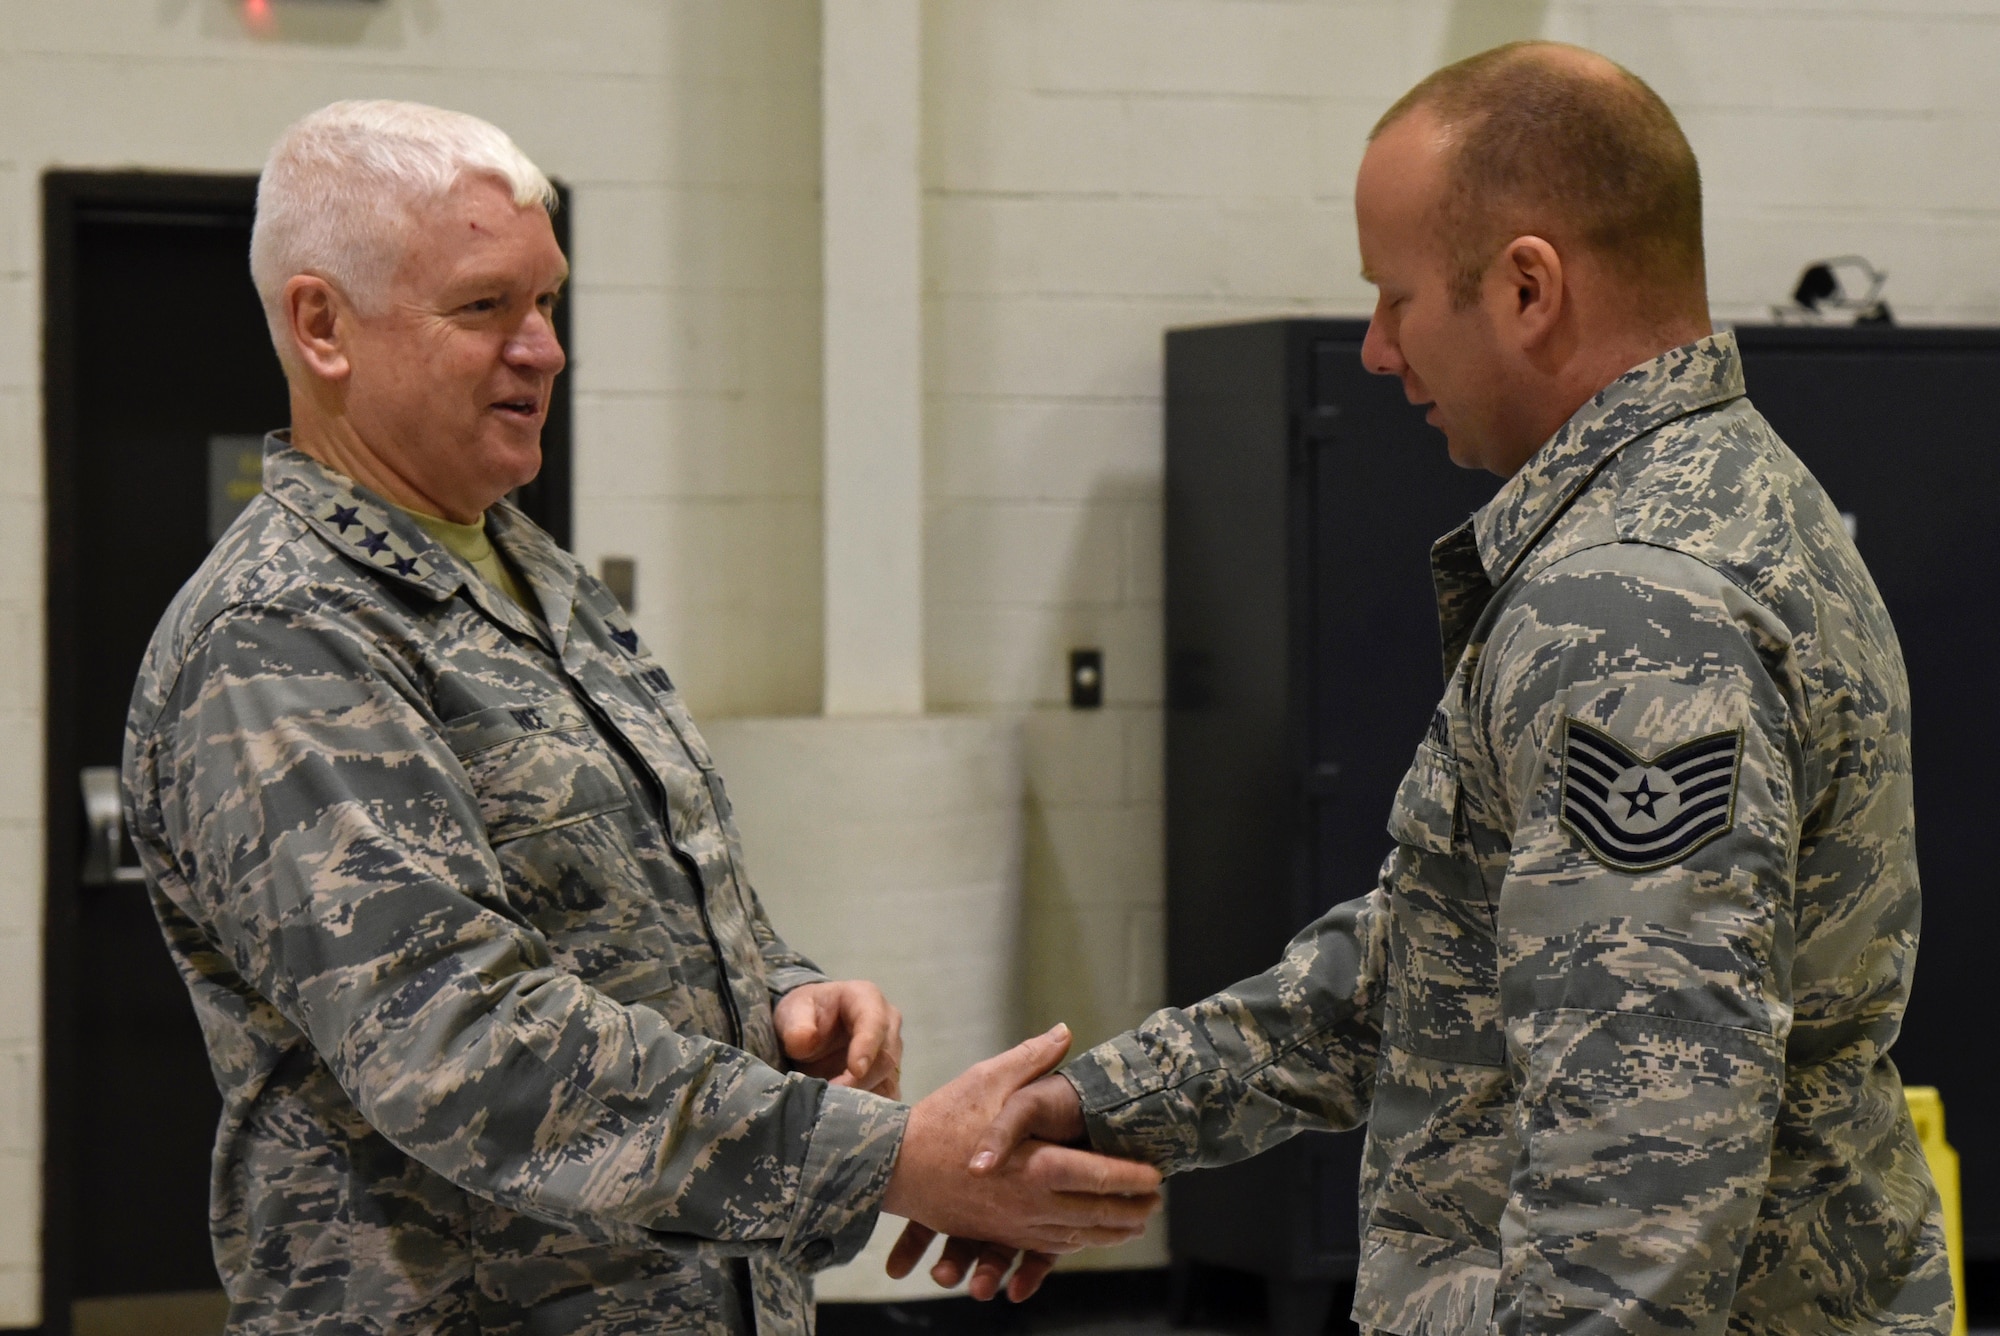 Lt. Gen. L. Scott Rice, the Director of the Air National Guard, shakes hands with Tech. Sgt. Michael Dison, 175th Aircraft Maintenance Squadron crew chief, February 10, 2018 while touring Warfield Air National Guard Base, Middle River, Md.